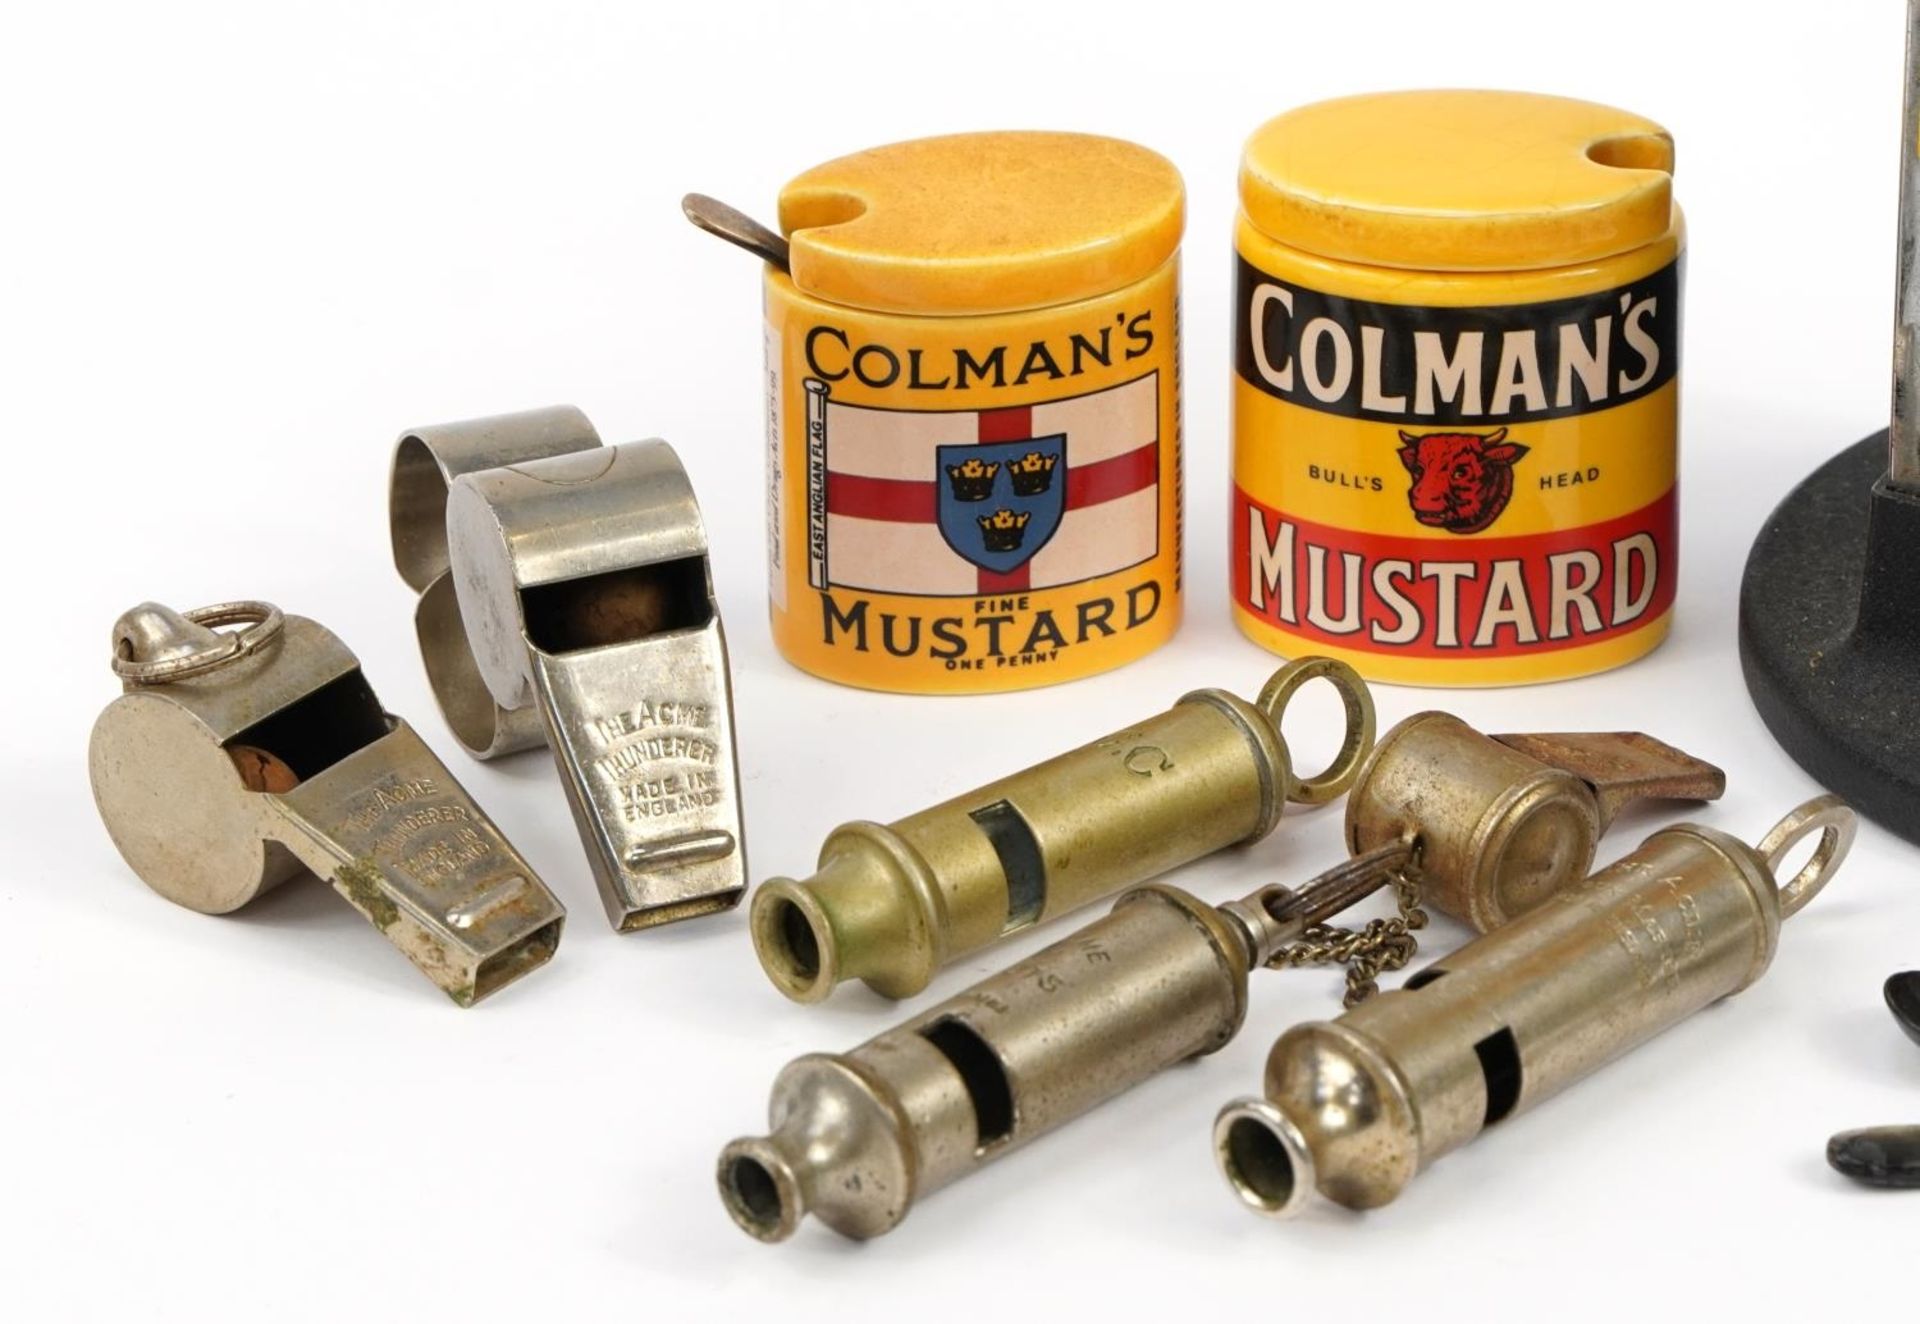 Vintage enamelled Coleman's Mustard pencil sharpener, mustard jars and whistles including The Acme - Image 2 of 4